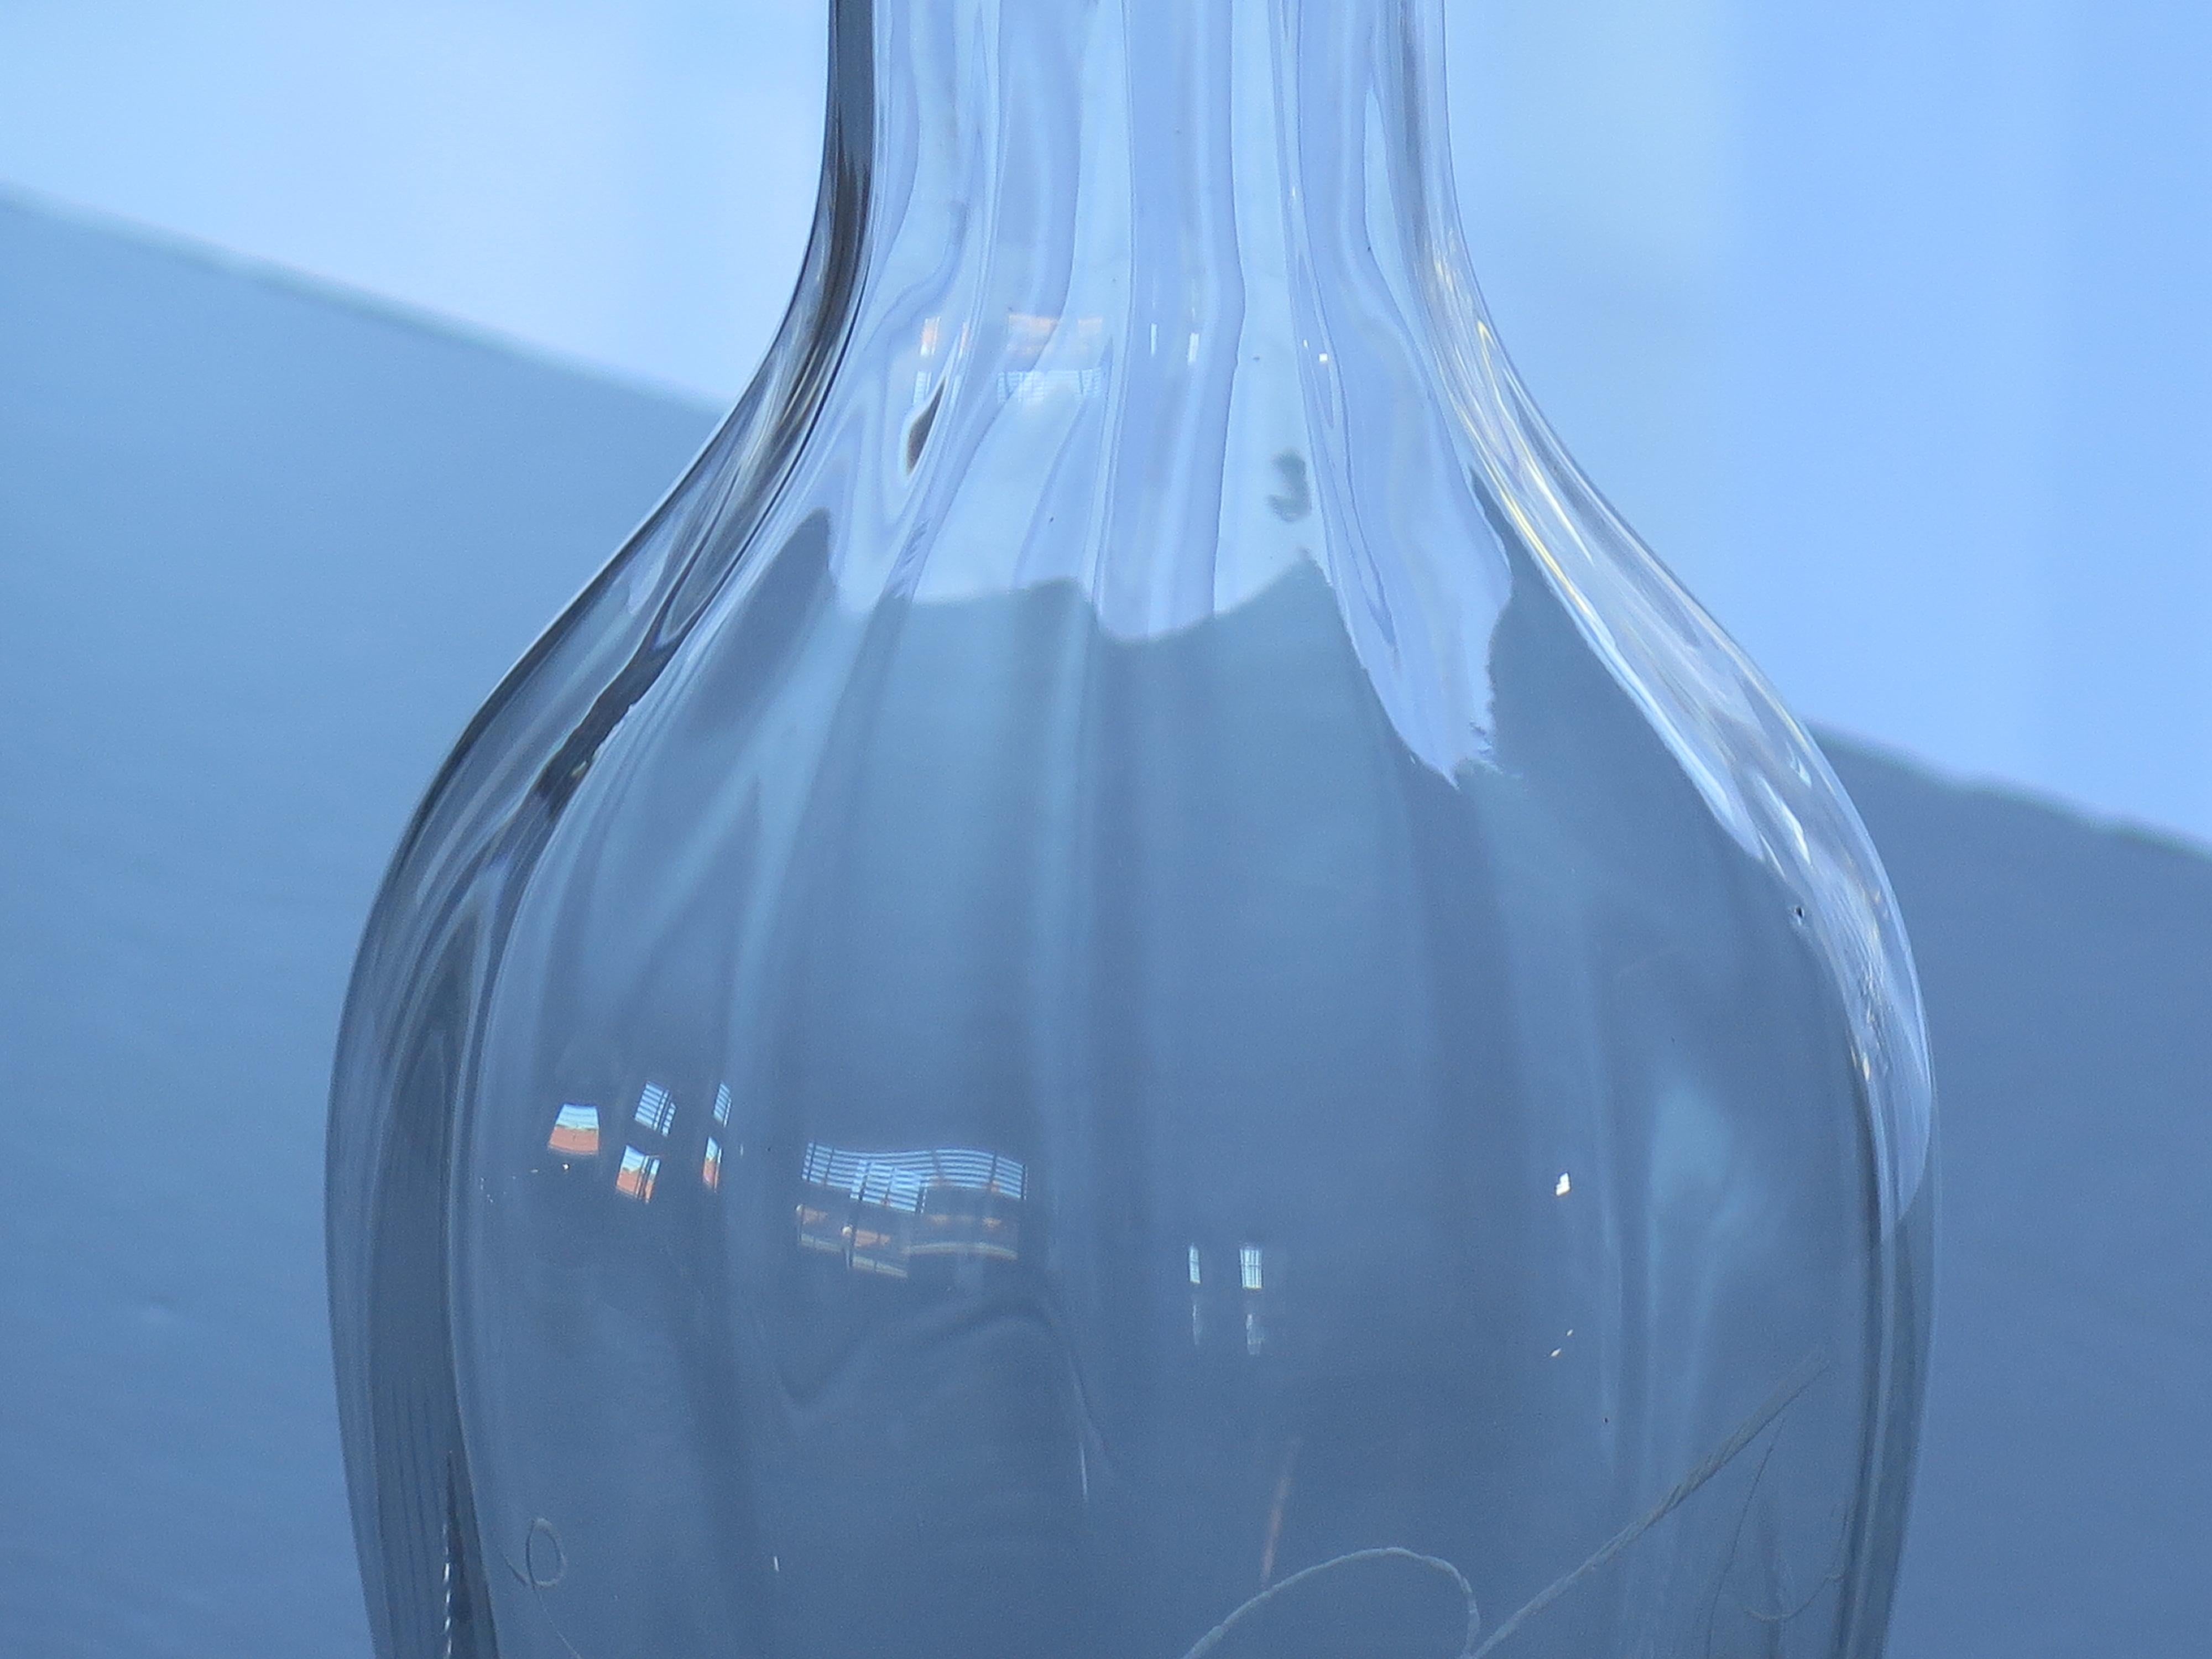 English Lead Crystal Glass Carafe or Decanter with Etched Grape Vine, Mid-20th Century For Sale